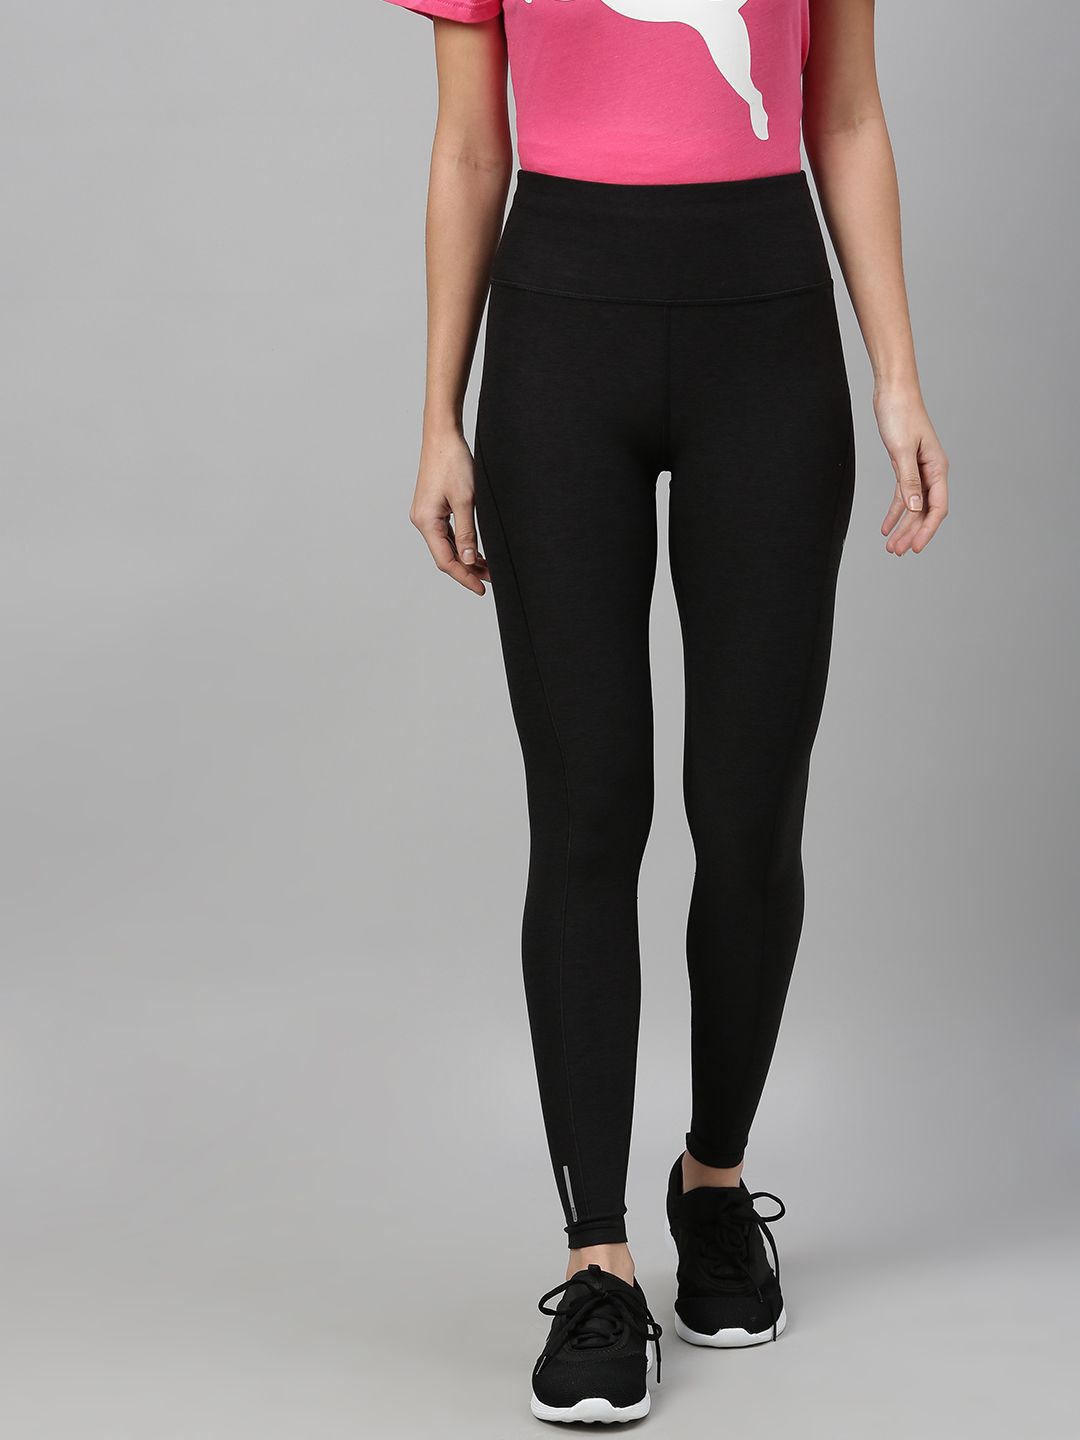 Puma Women Black Solid Drycell Regular Fit Studio Luxe Eclipse  Yoga Tights Price in India